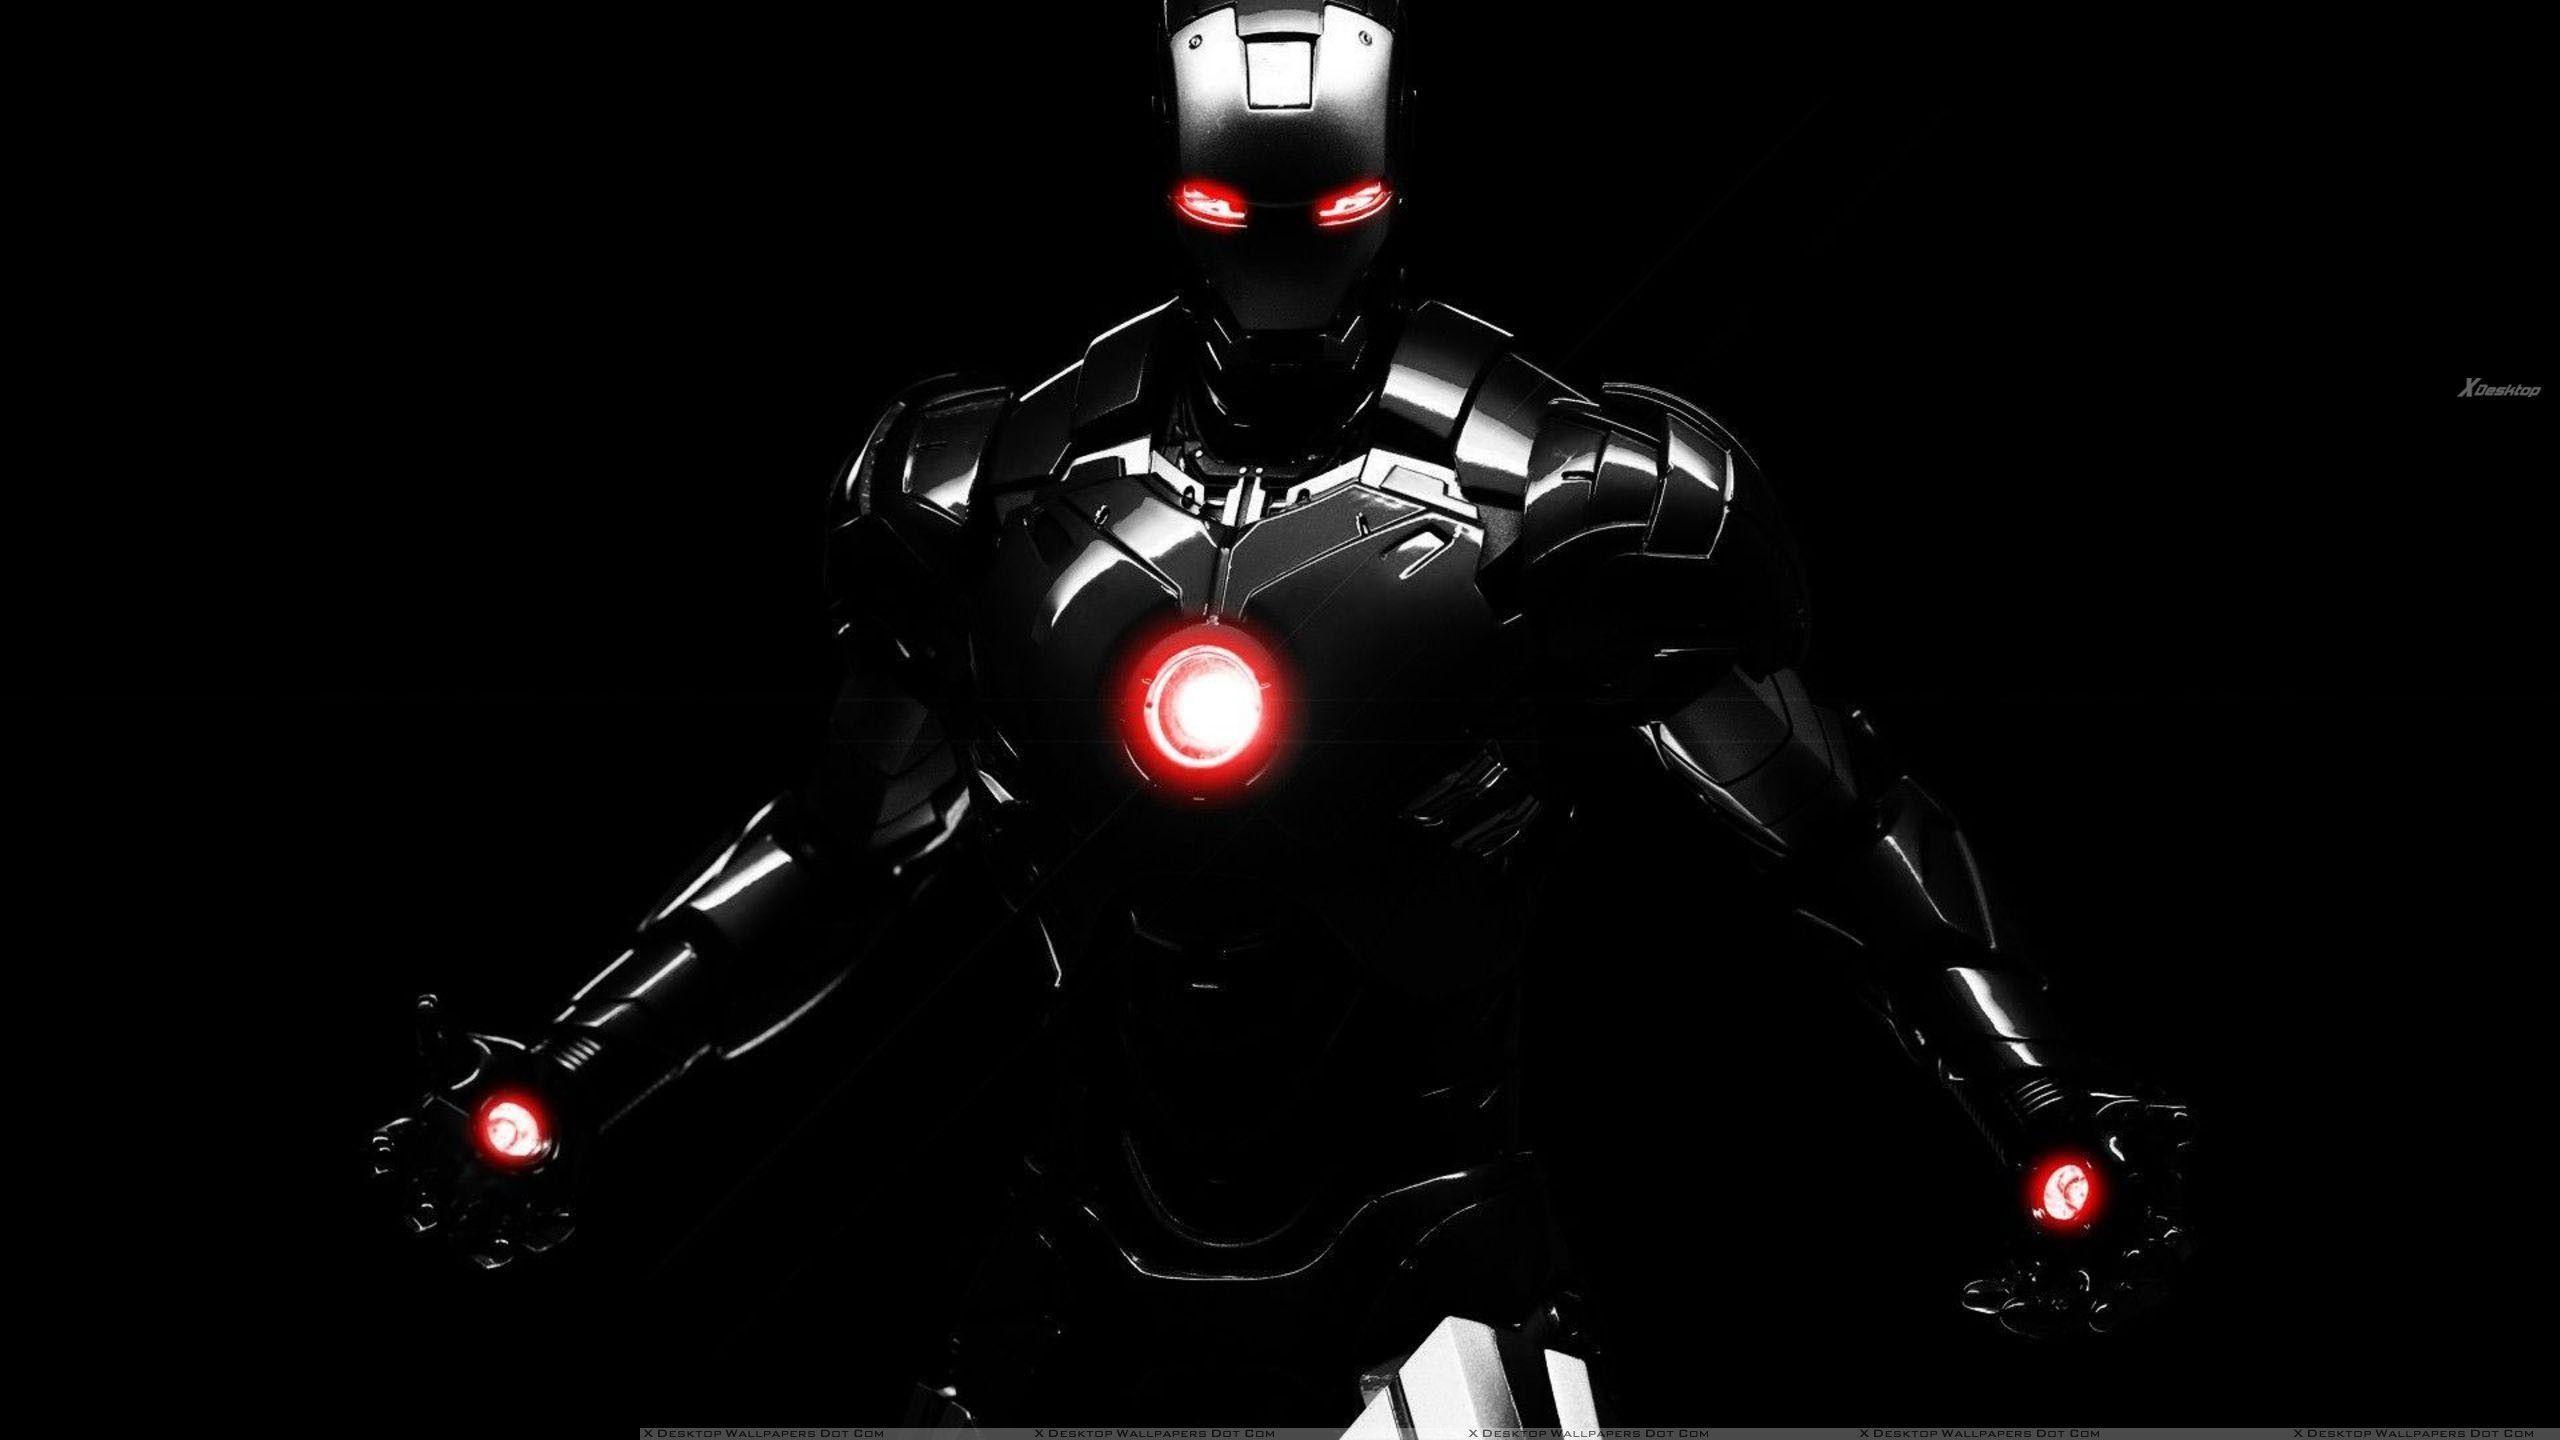 Pictures Of Iron Man 3 Mark 42 Suit Wallpaper Rock Cafe